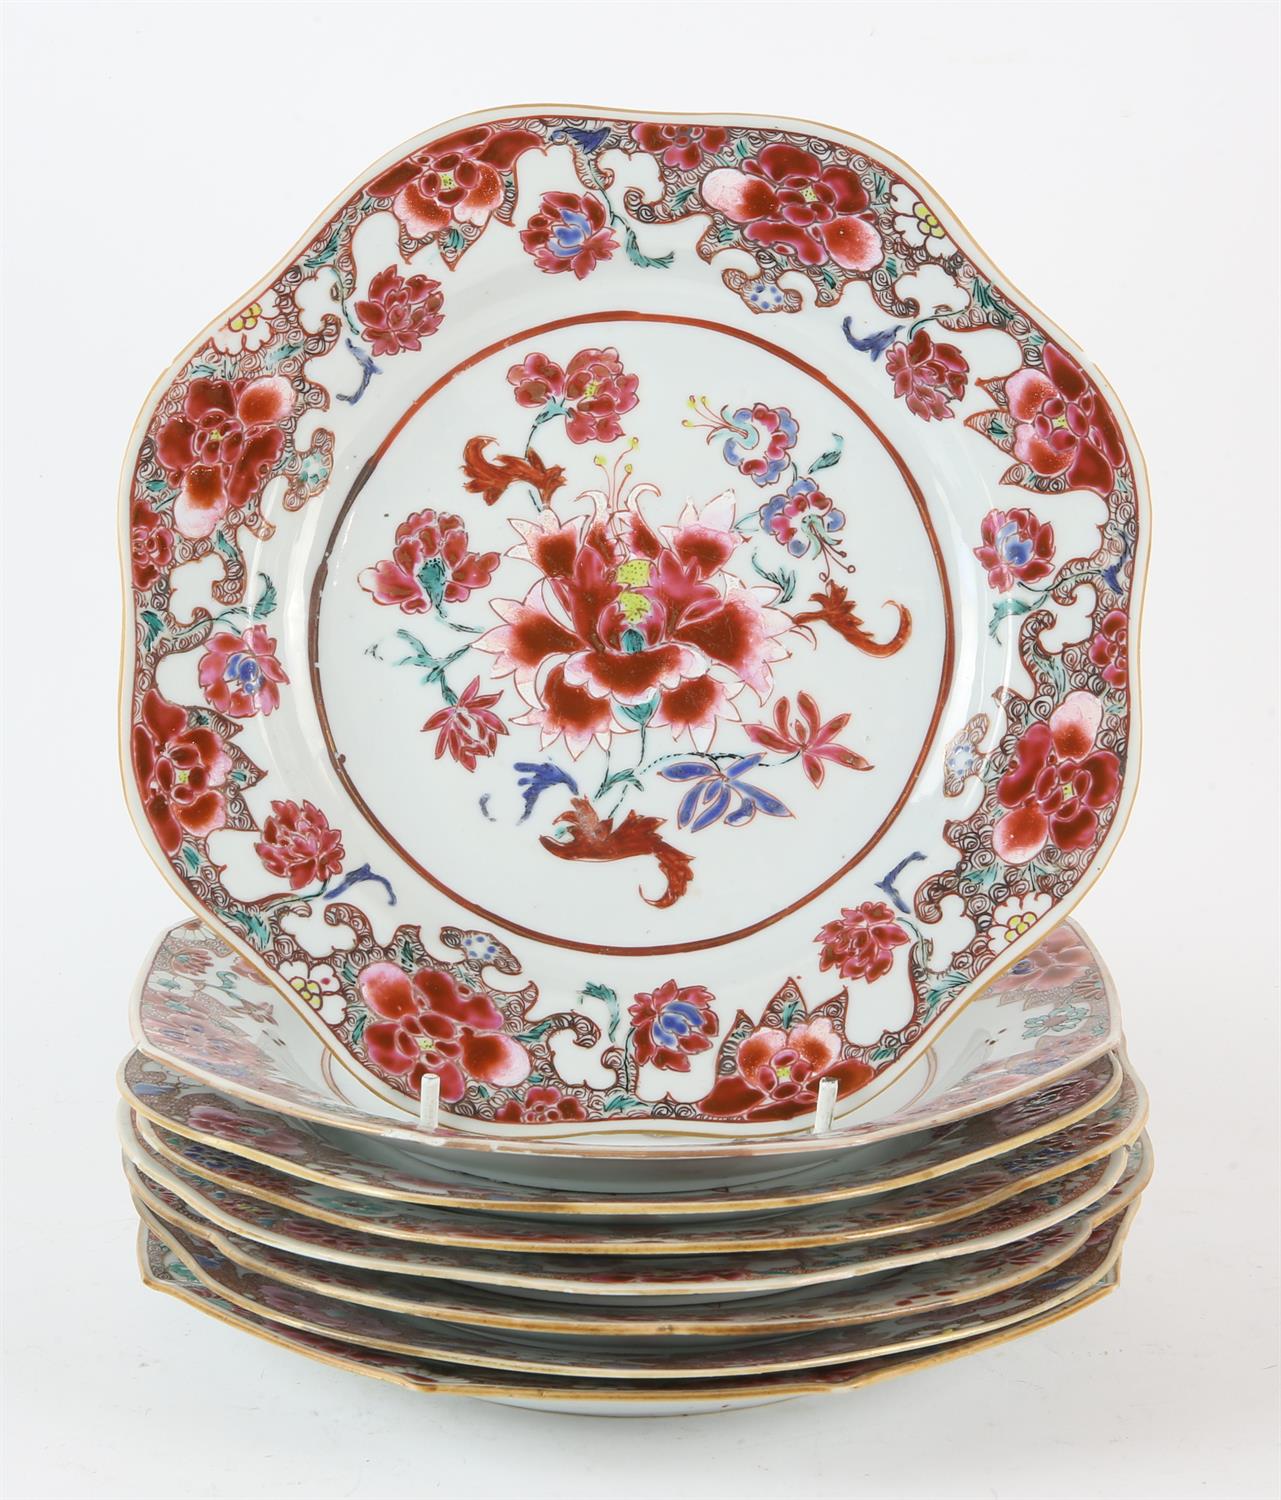 Eight famille rose dishes; each one decorated with floral designs and about 22.5 cm diameter, - Image 2 of 28